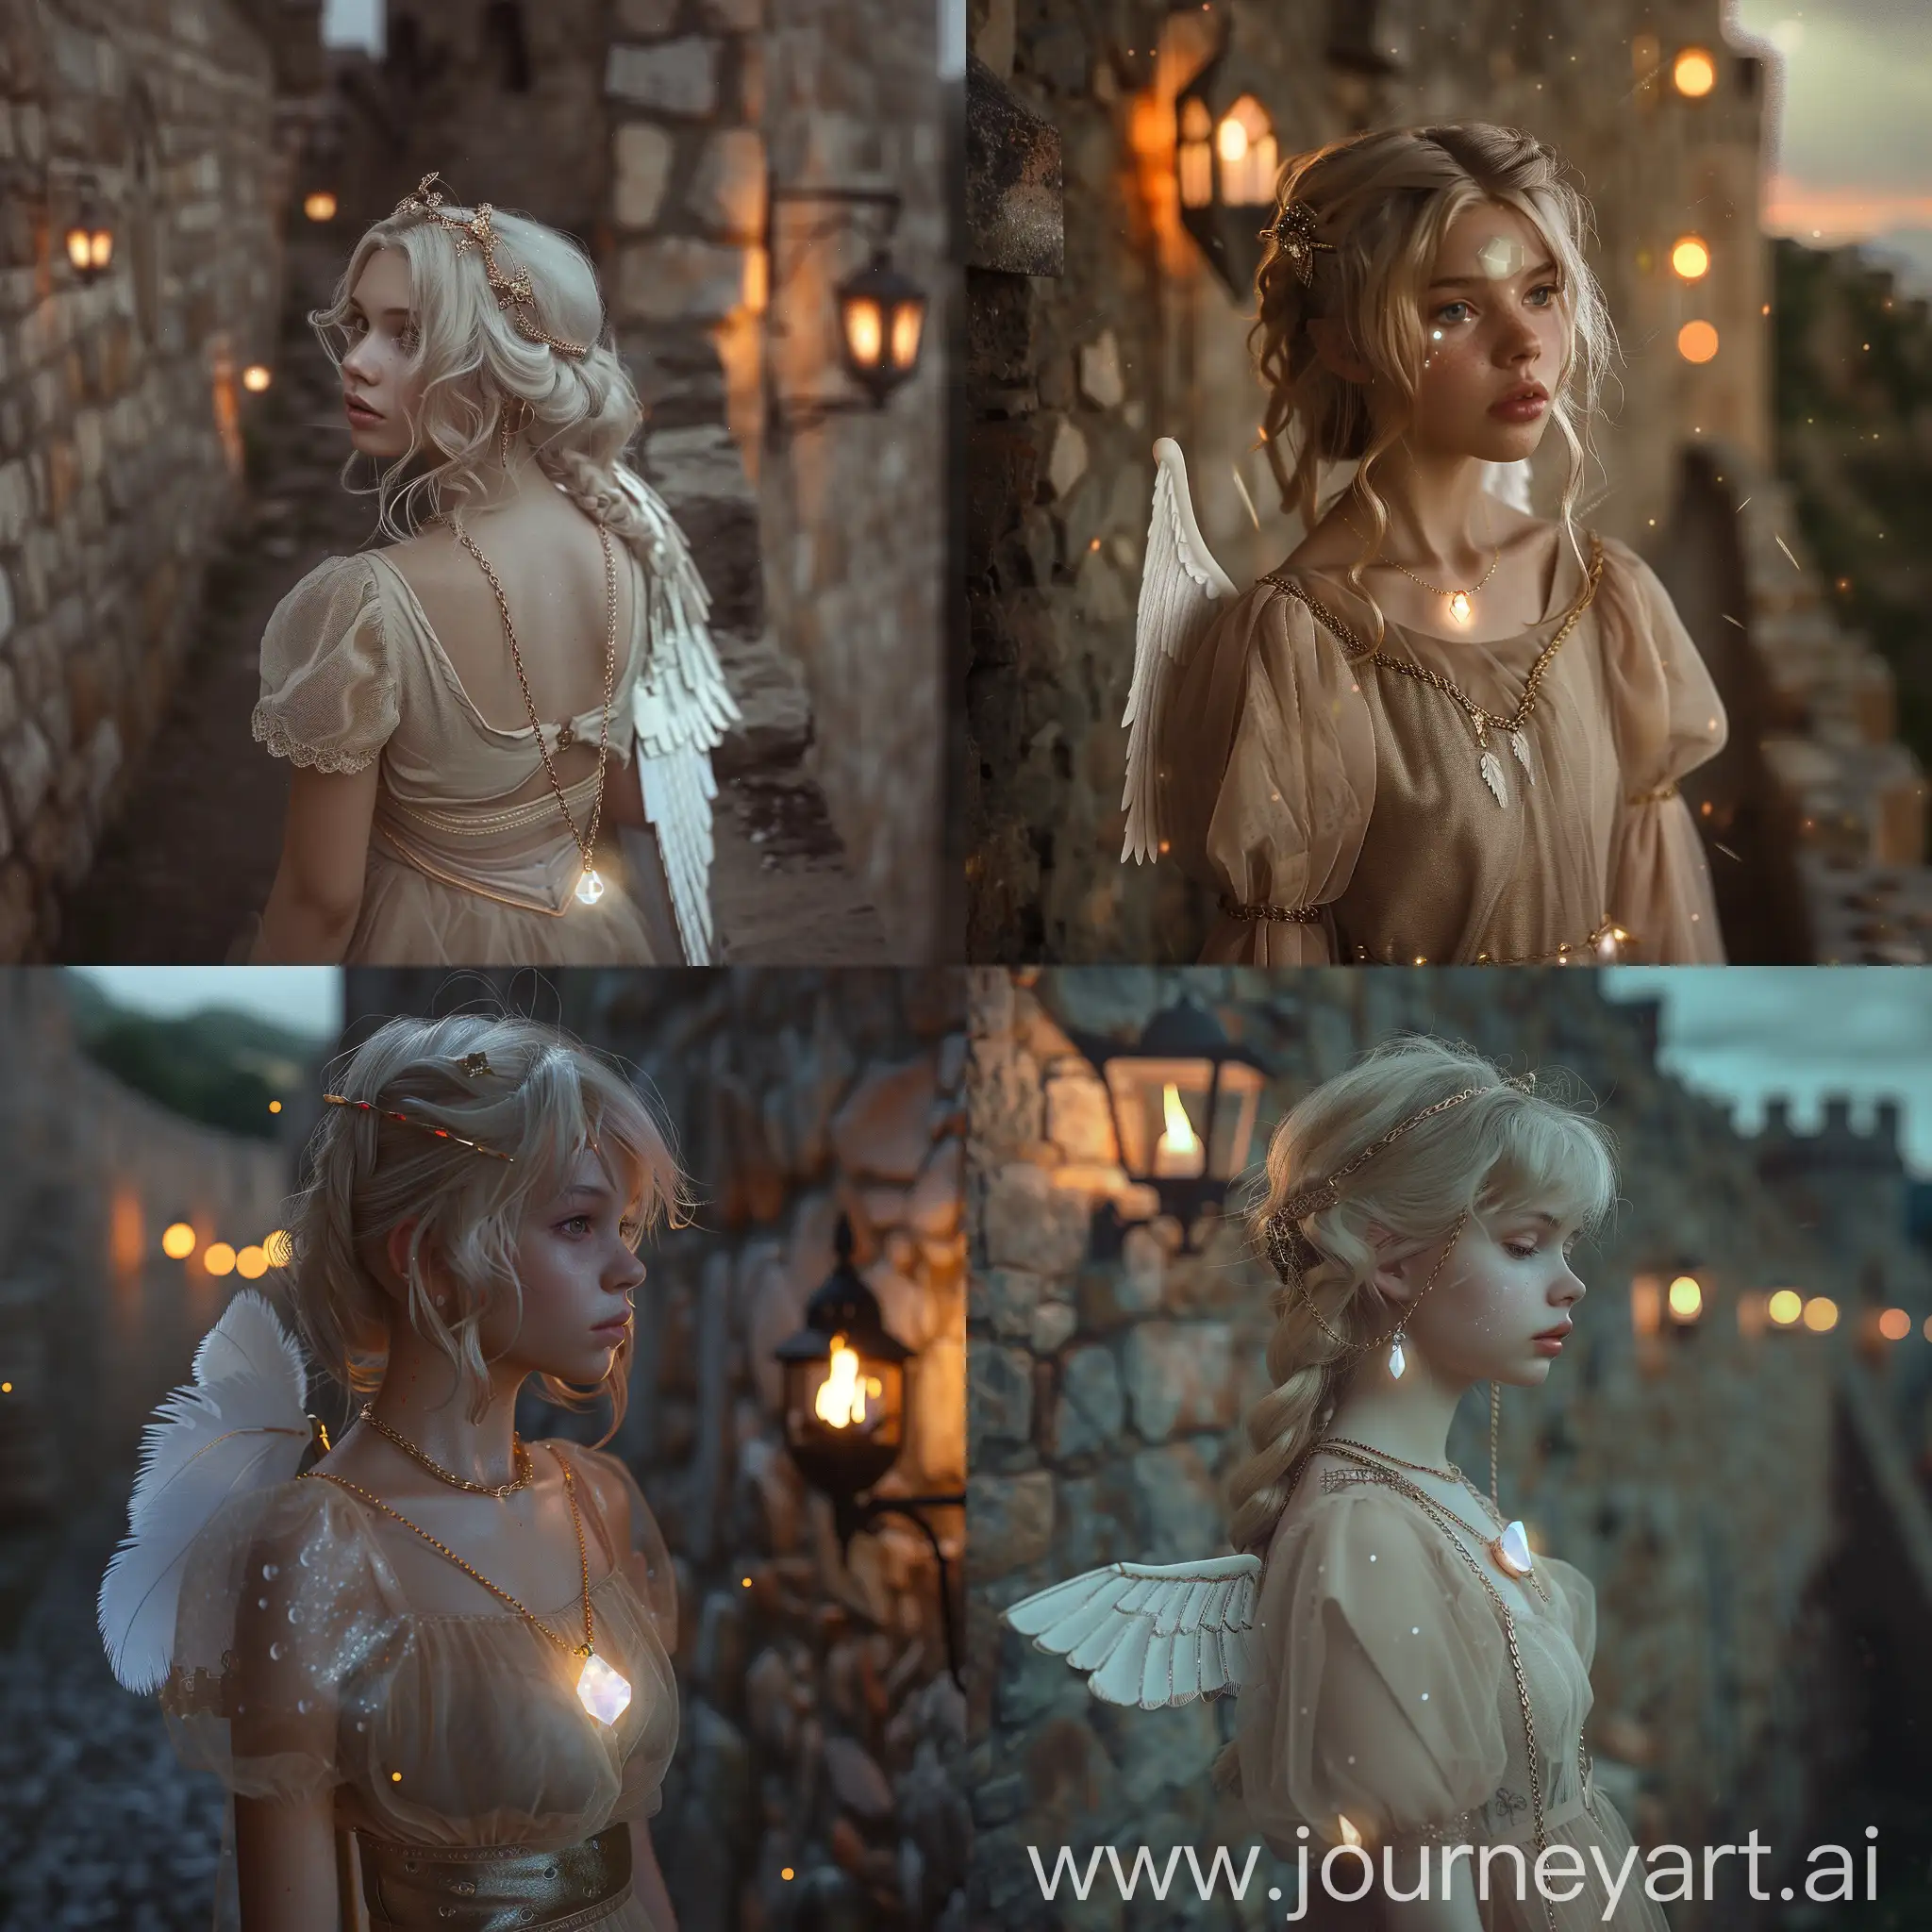  beautiful girl, blonde hair, glowing small crystal on a gold chain around her neck, white wing on her back, transparent beige dress, medieval castle, walls, darkness, torches, realistic, fantasy concept